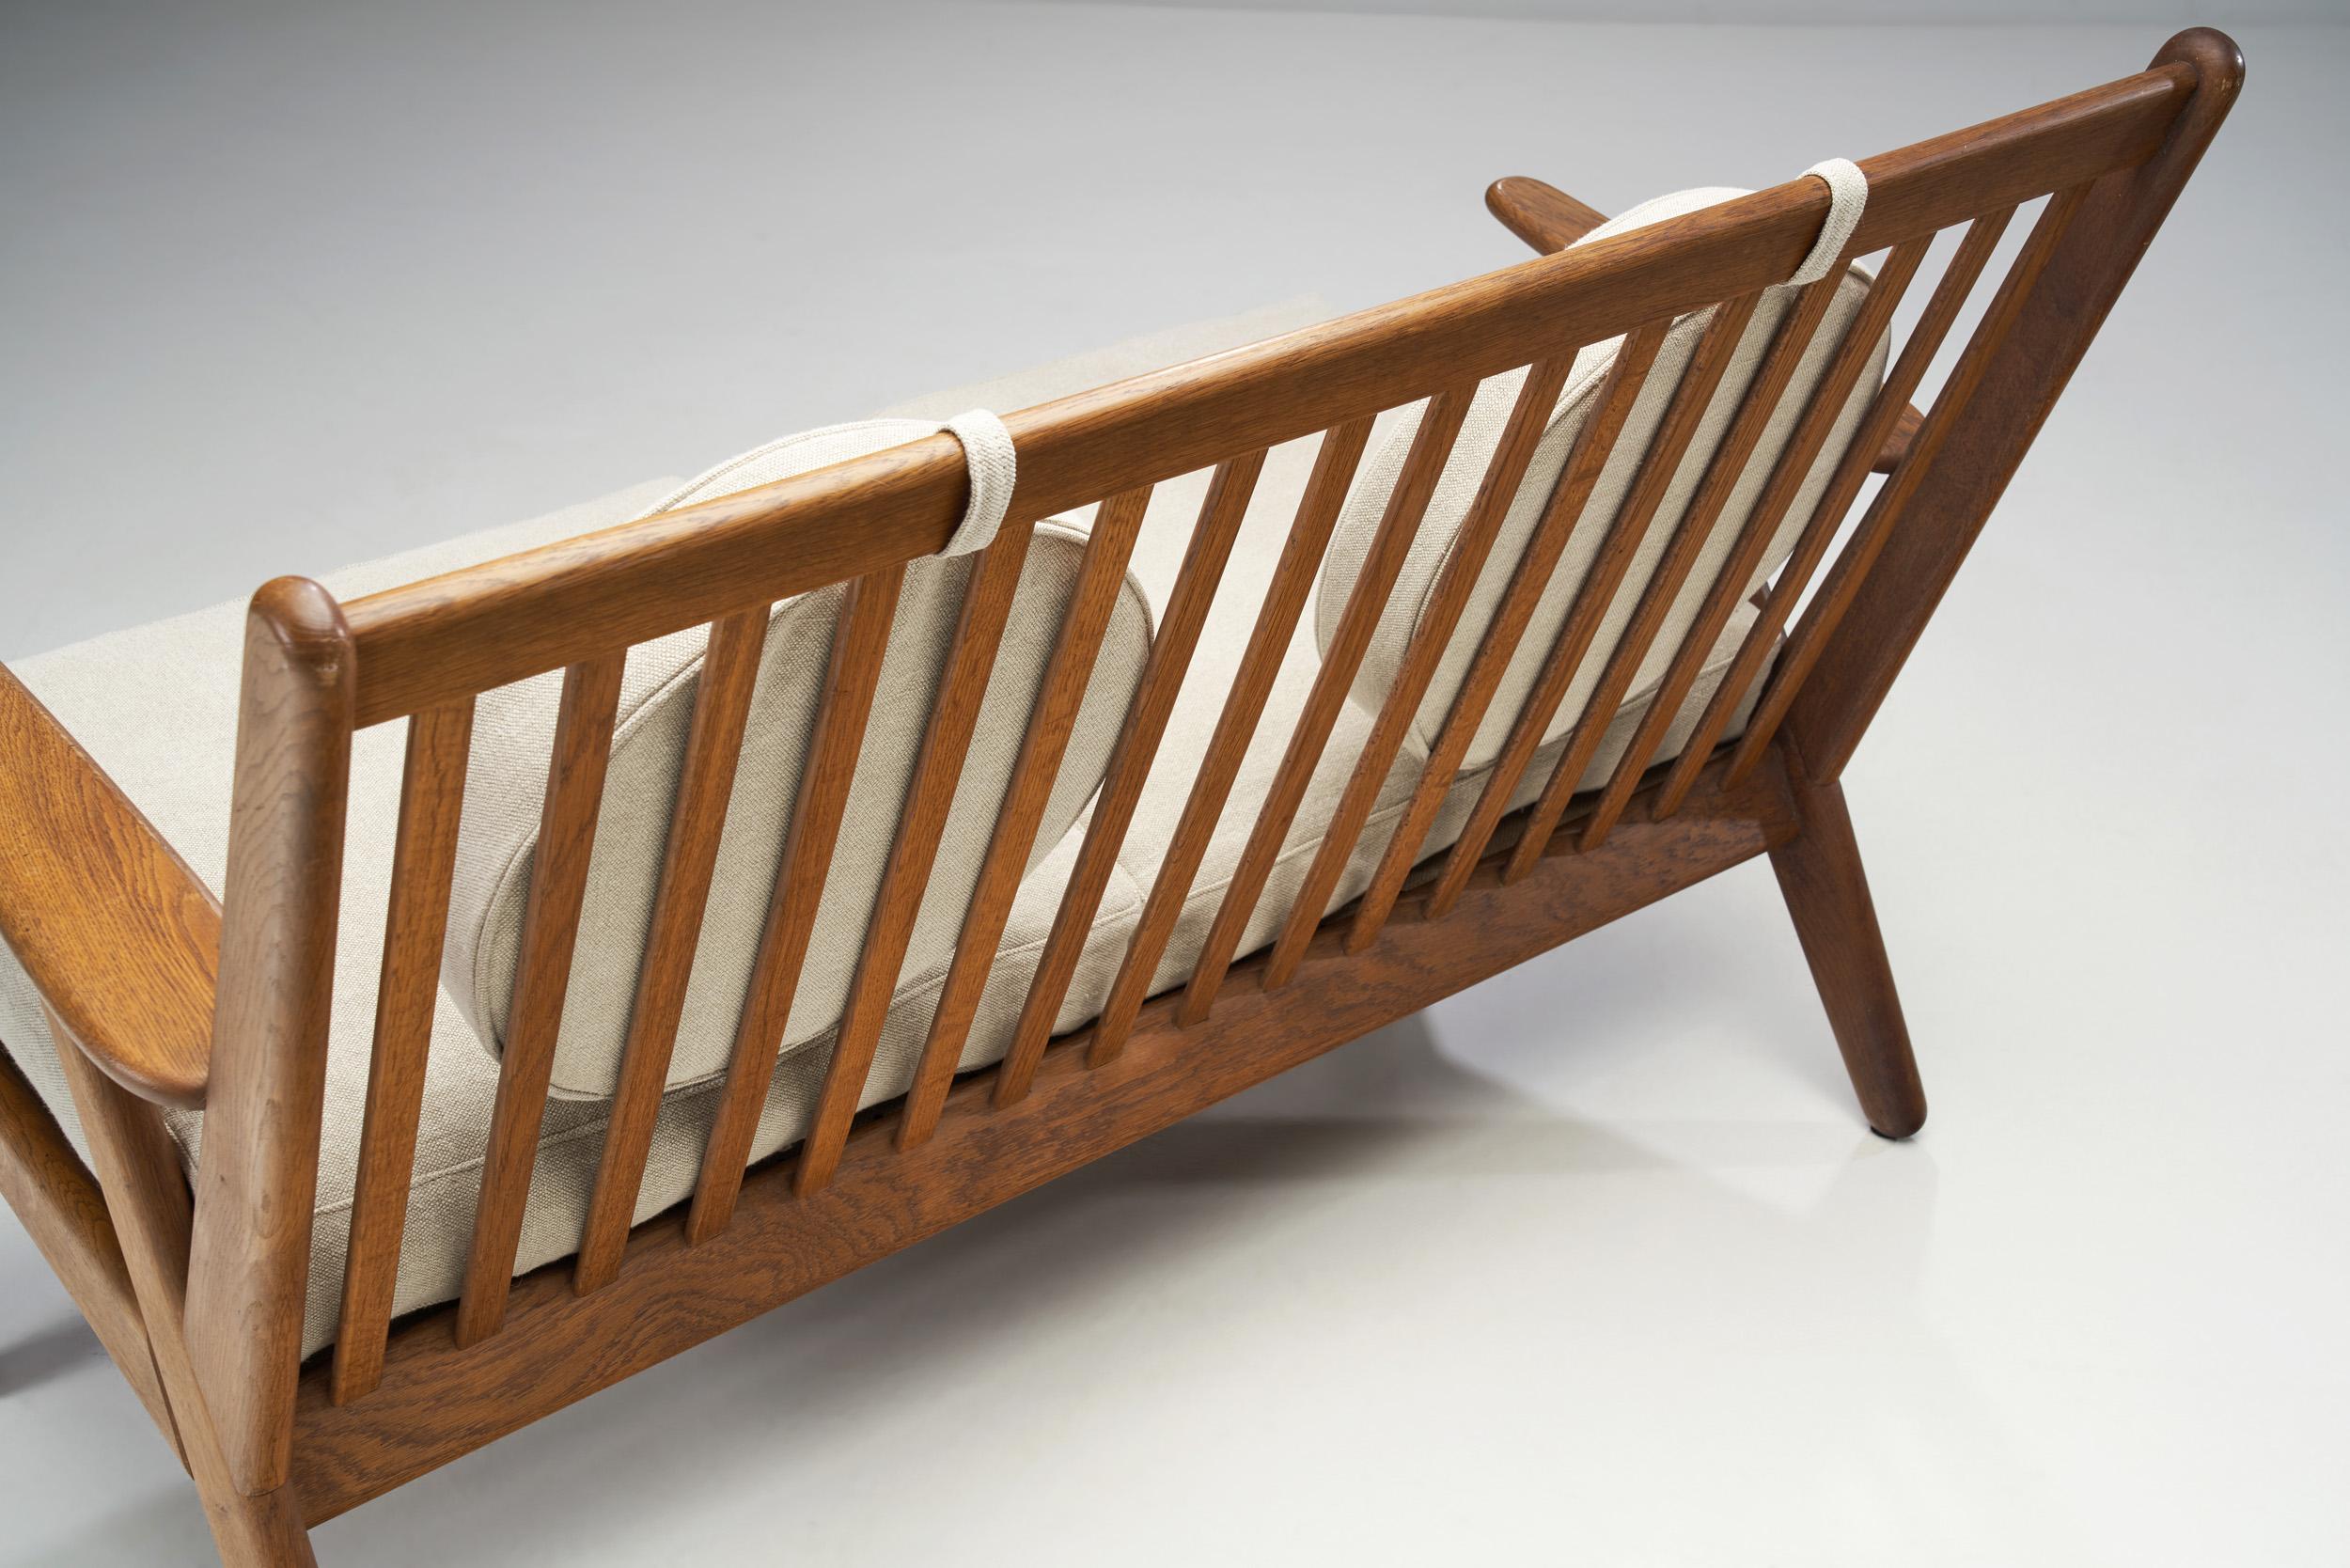 Danish Oak Two-Seater Bench with Pillows, Denmark ca. 1950s For Sale 5